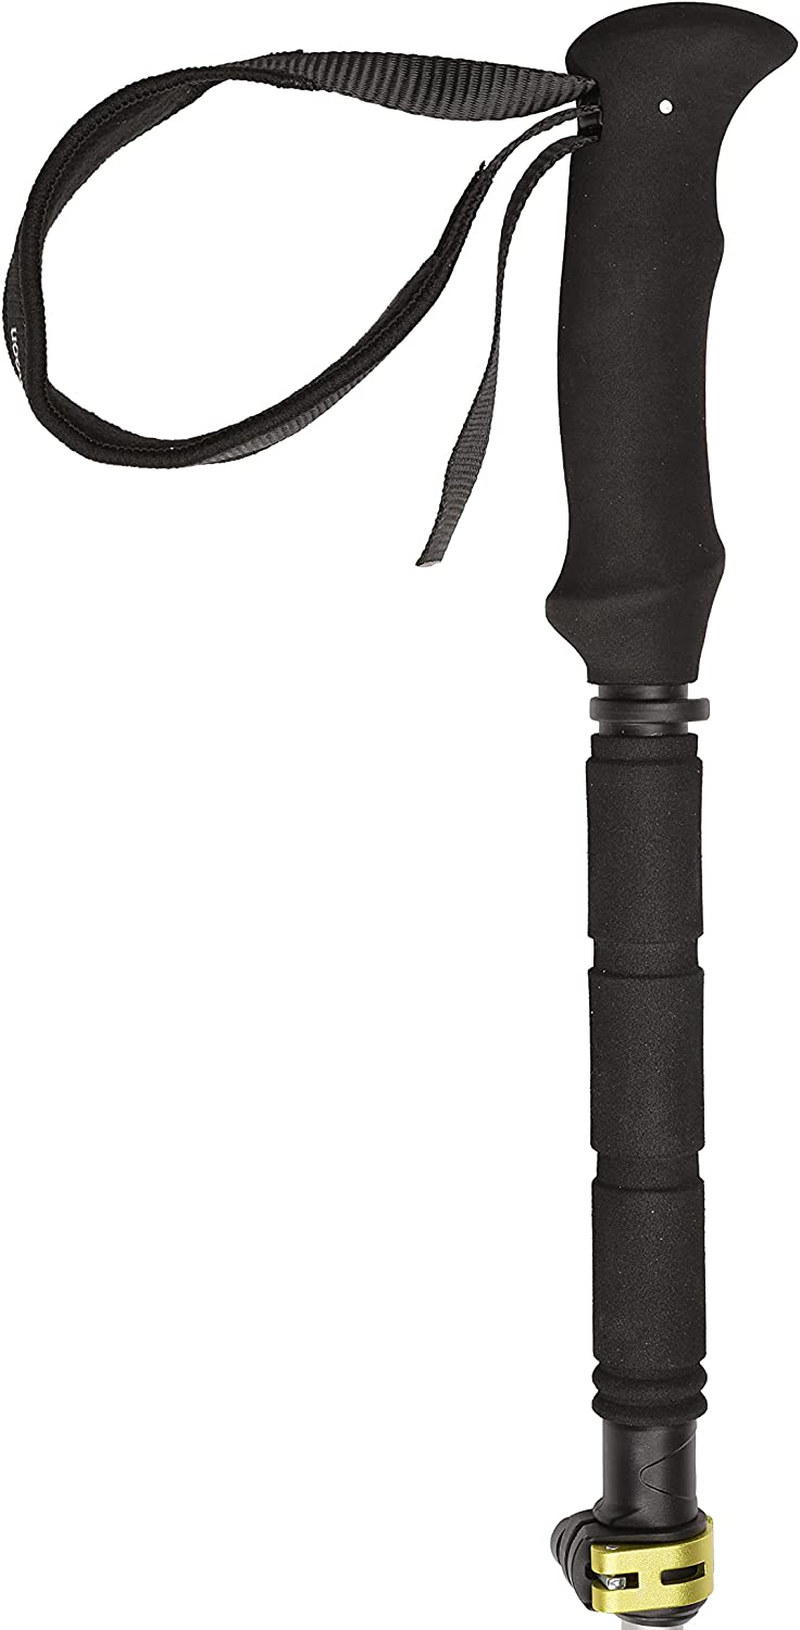 Crescent Moon All-Season Trekking Poles for Hiking, Walking, Camping & Backpacking